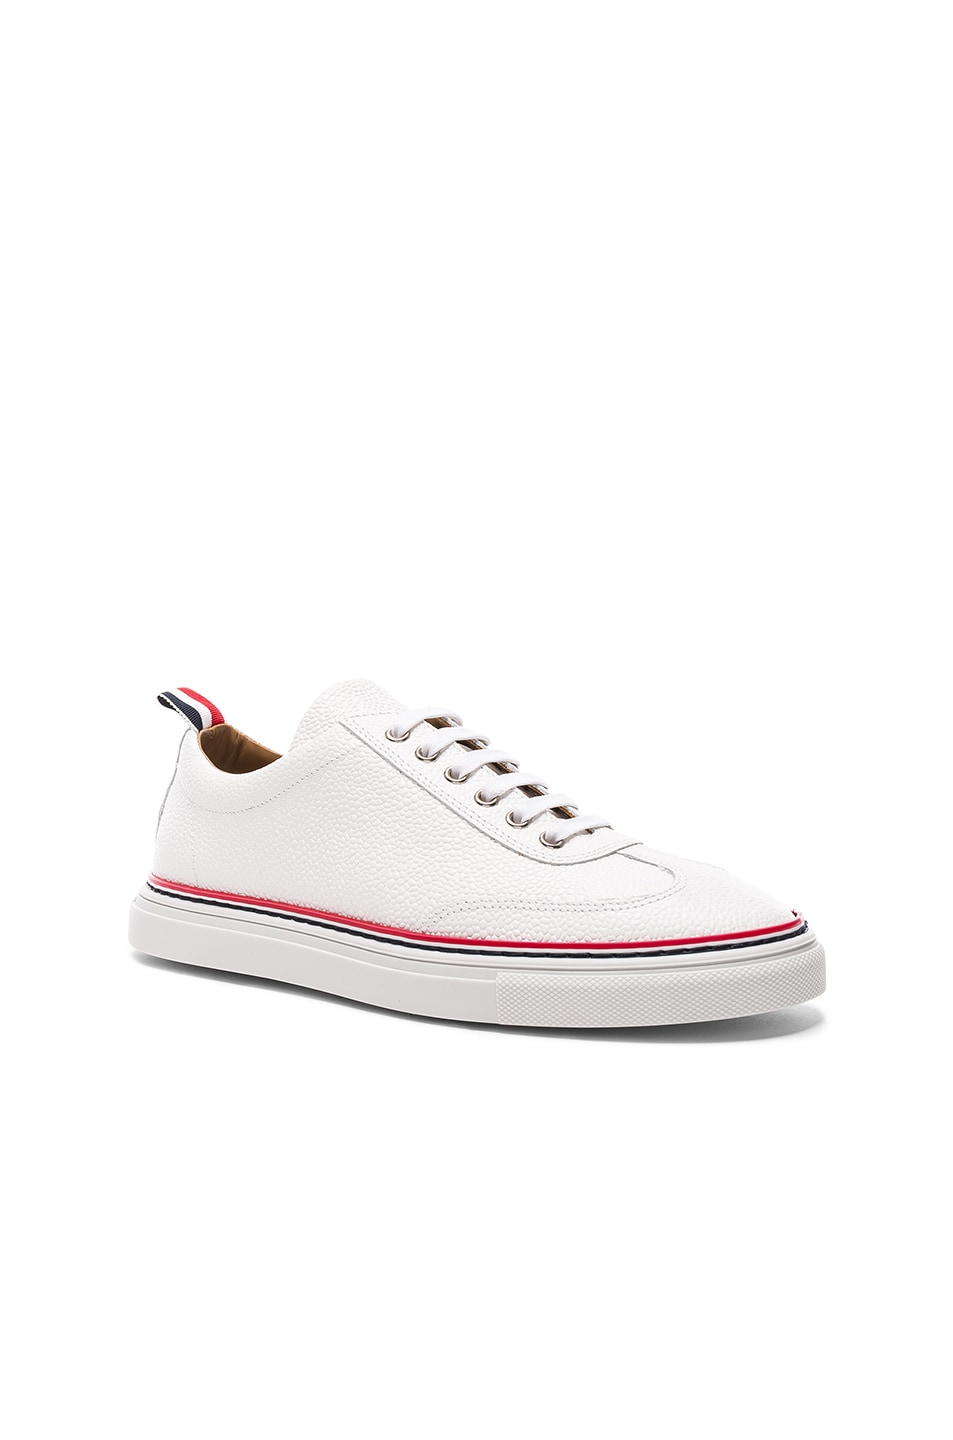 Image 1 of Thom Browne Pebble Grain Trainers in White